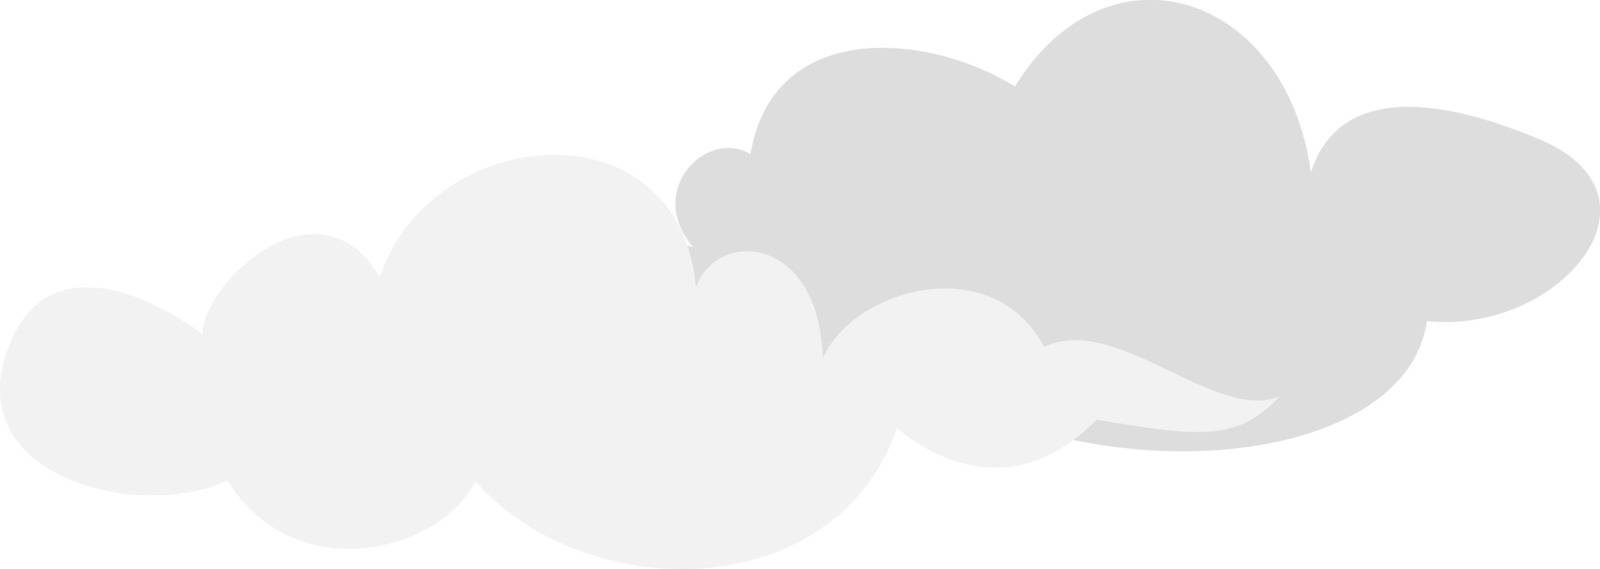 White clouds, illustration, vector on white background by Morphart